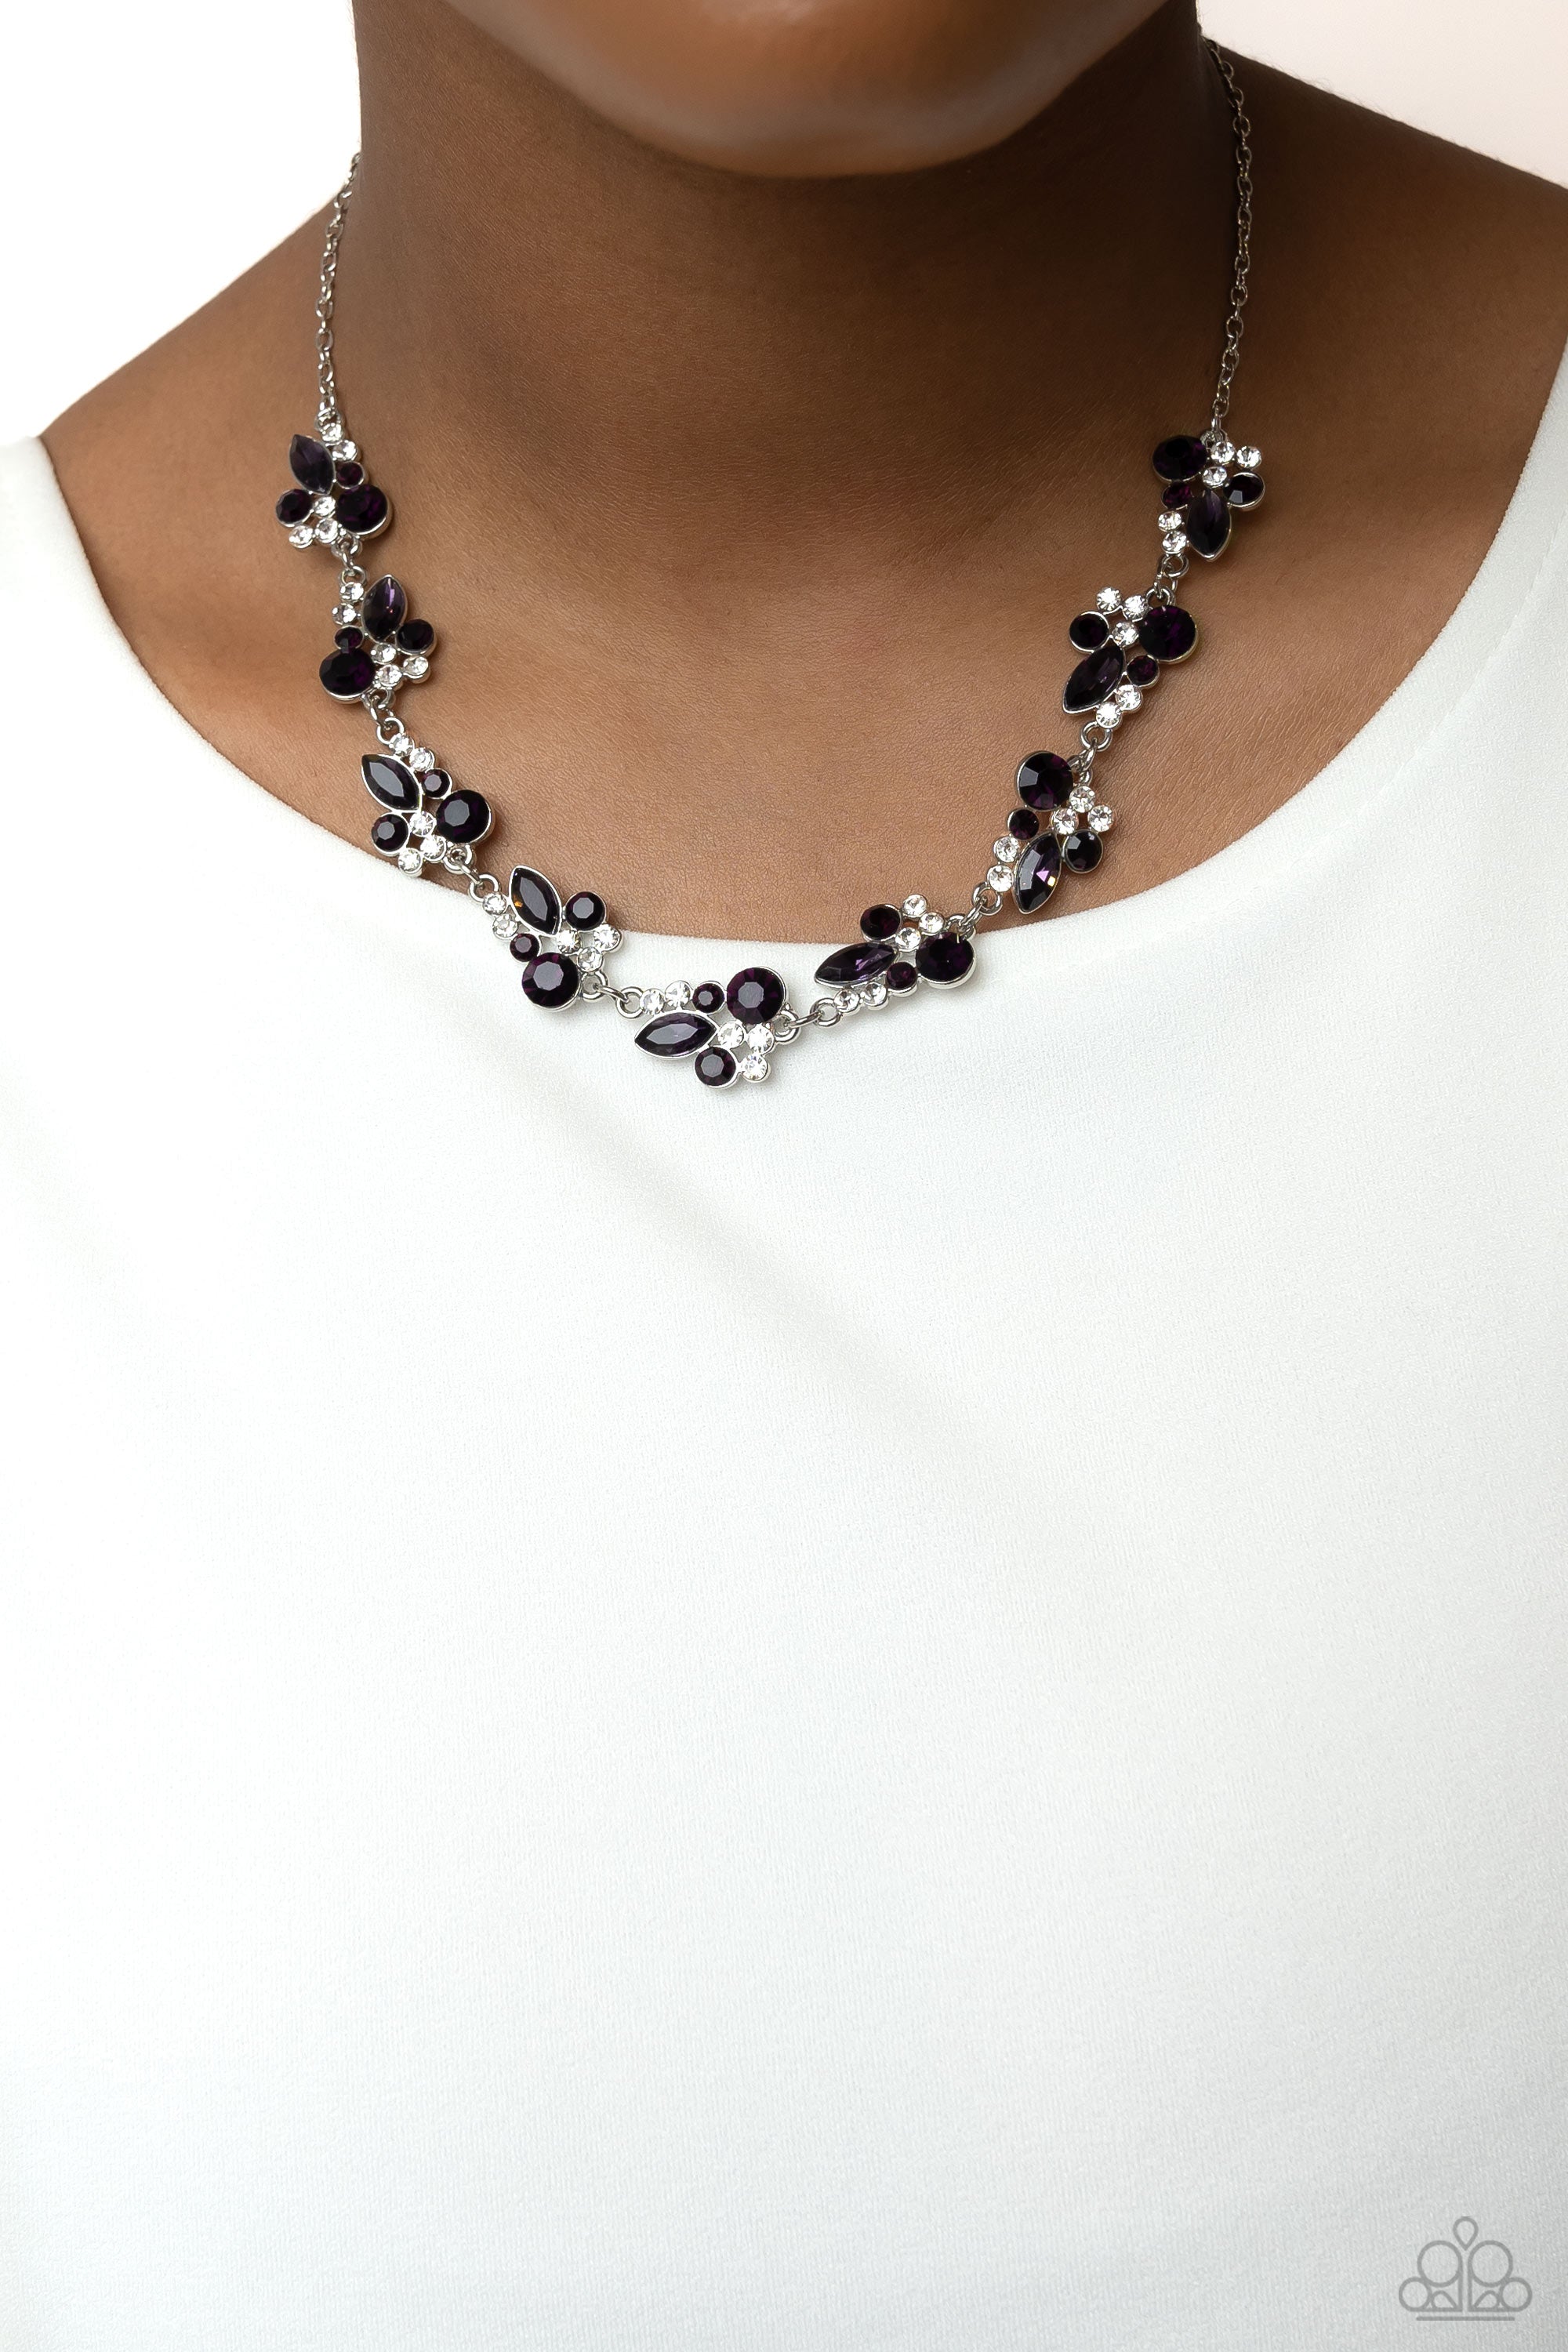 Swimming in Sparkles Purple Rhinestone Necklace - Paparazzi Accessories- lightbox - CarasShop.com - $5 Jewelry by Cara Jewels